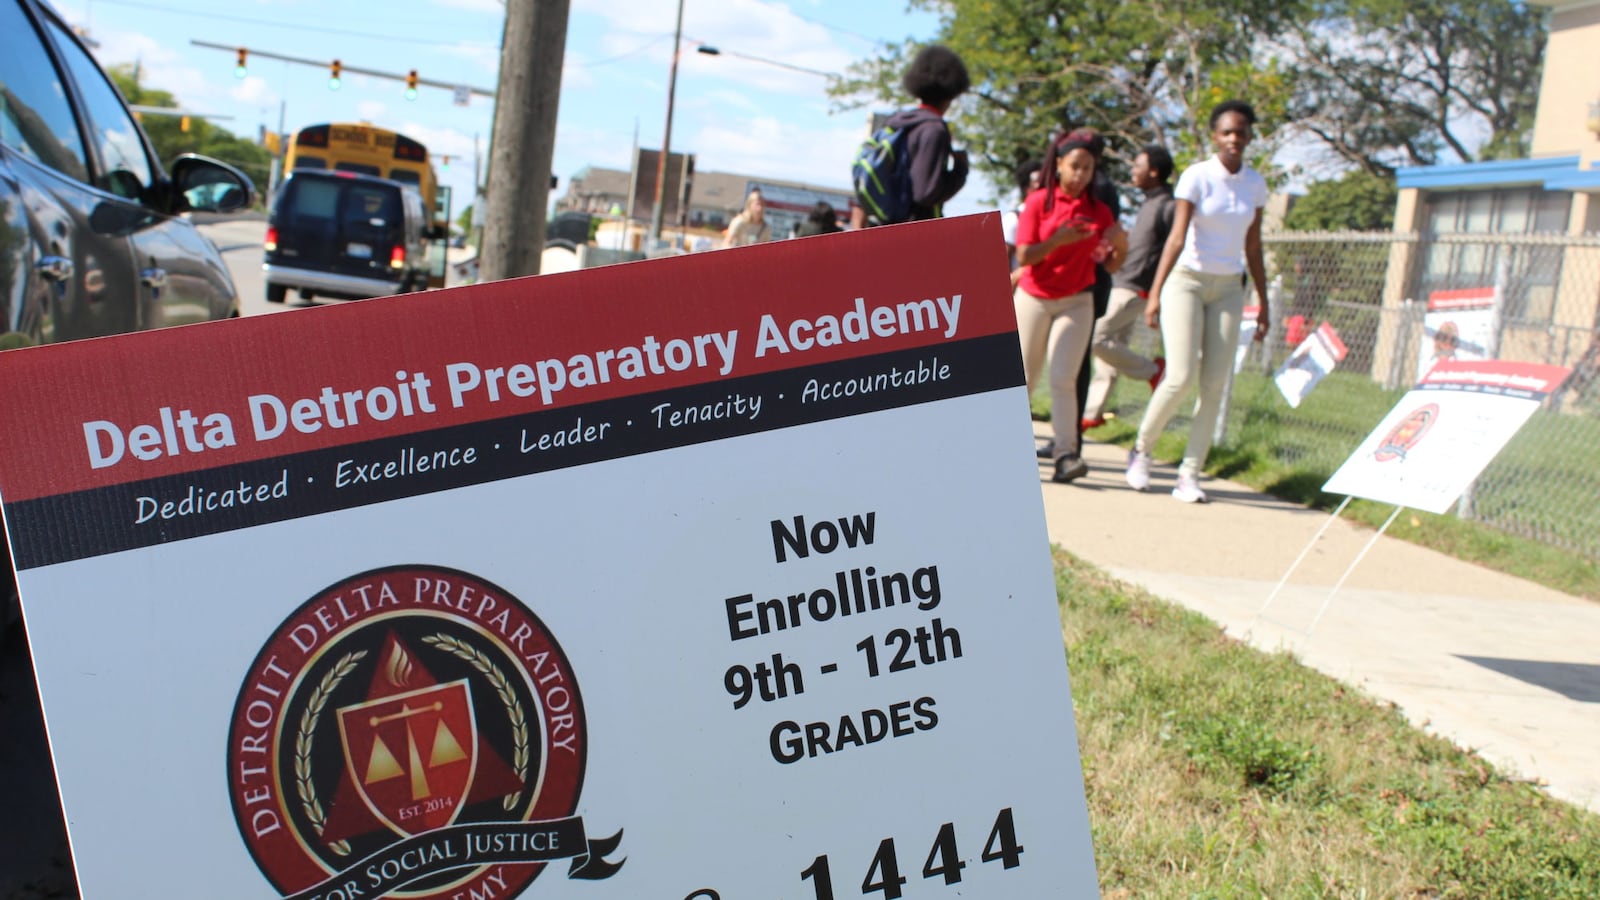 Students at Detroit Delta Preparatory Academy were let out early on Wednesday after learning that their school will close next week.